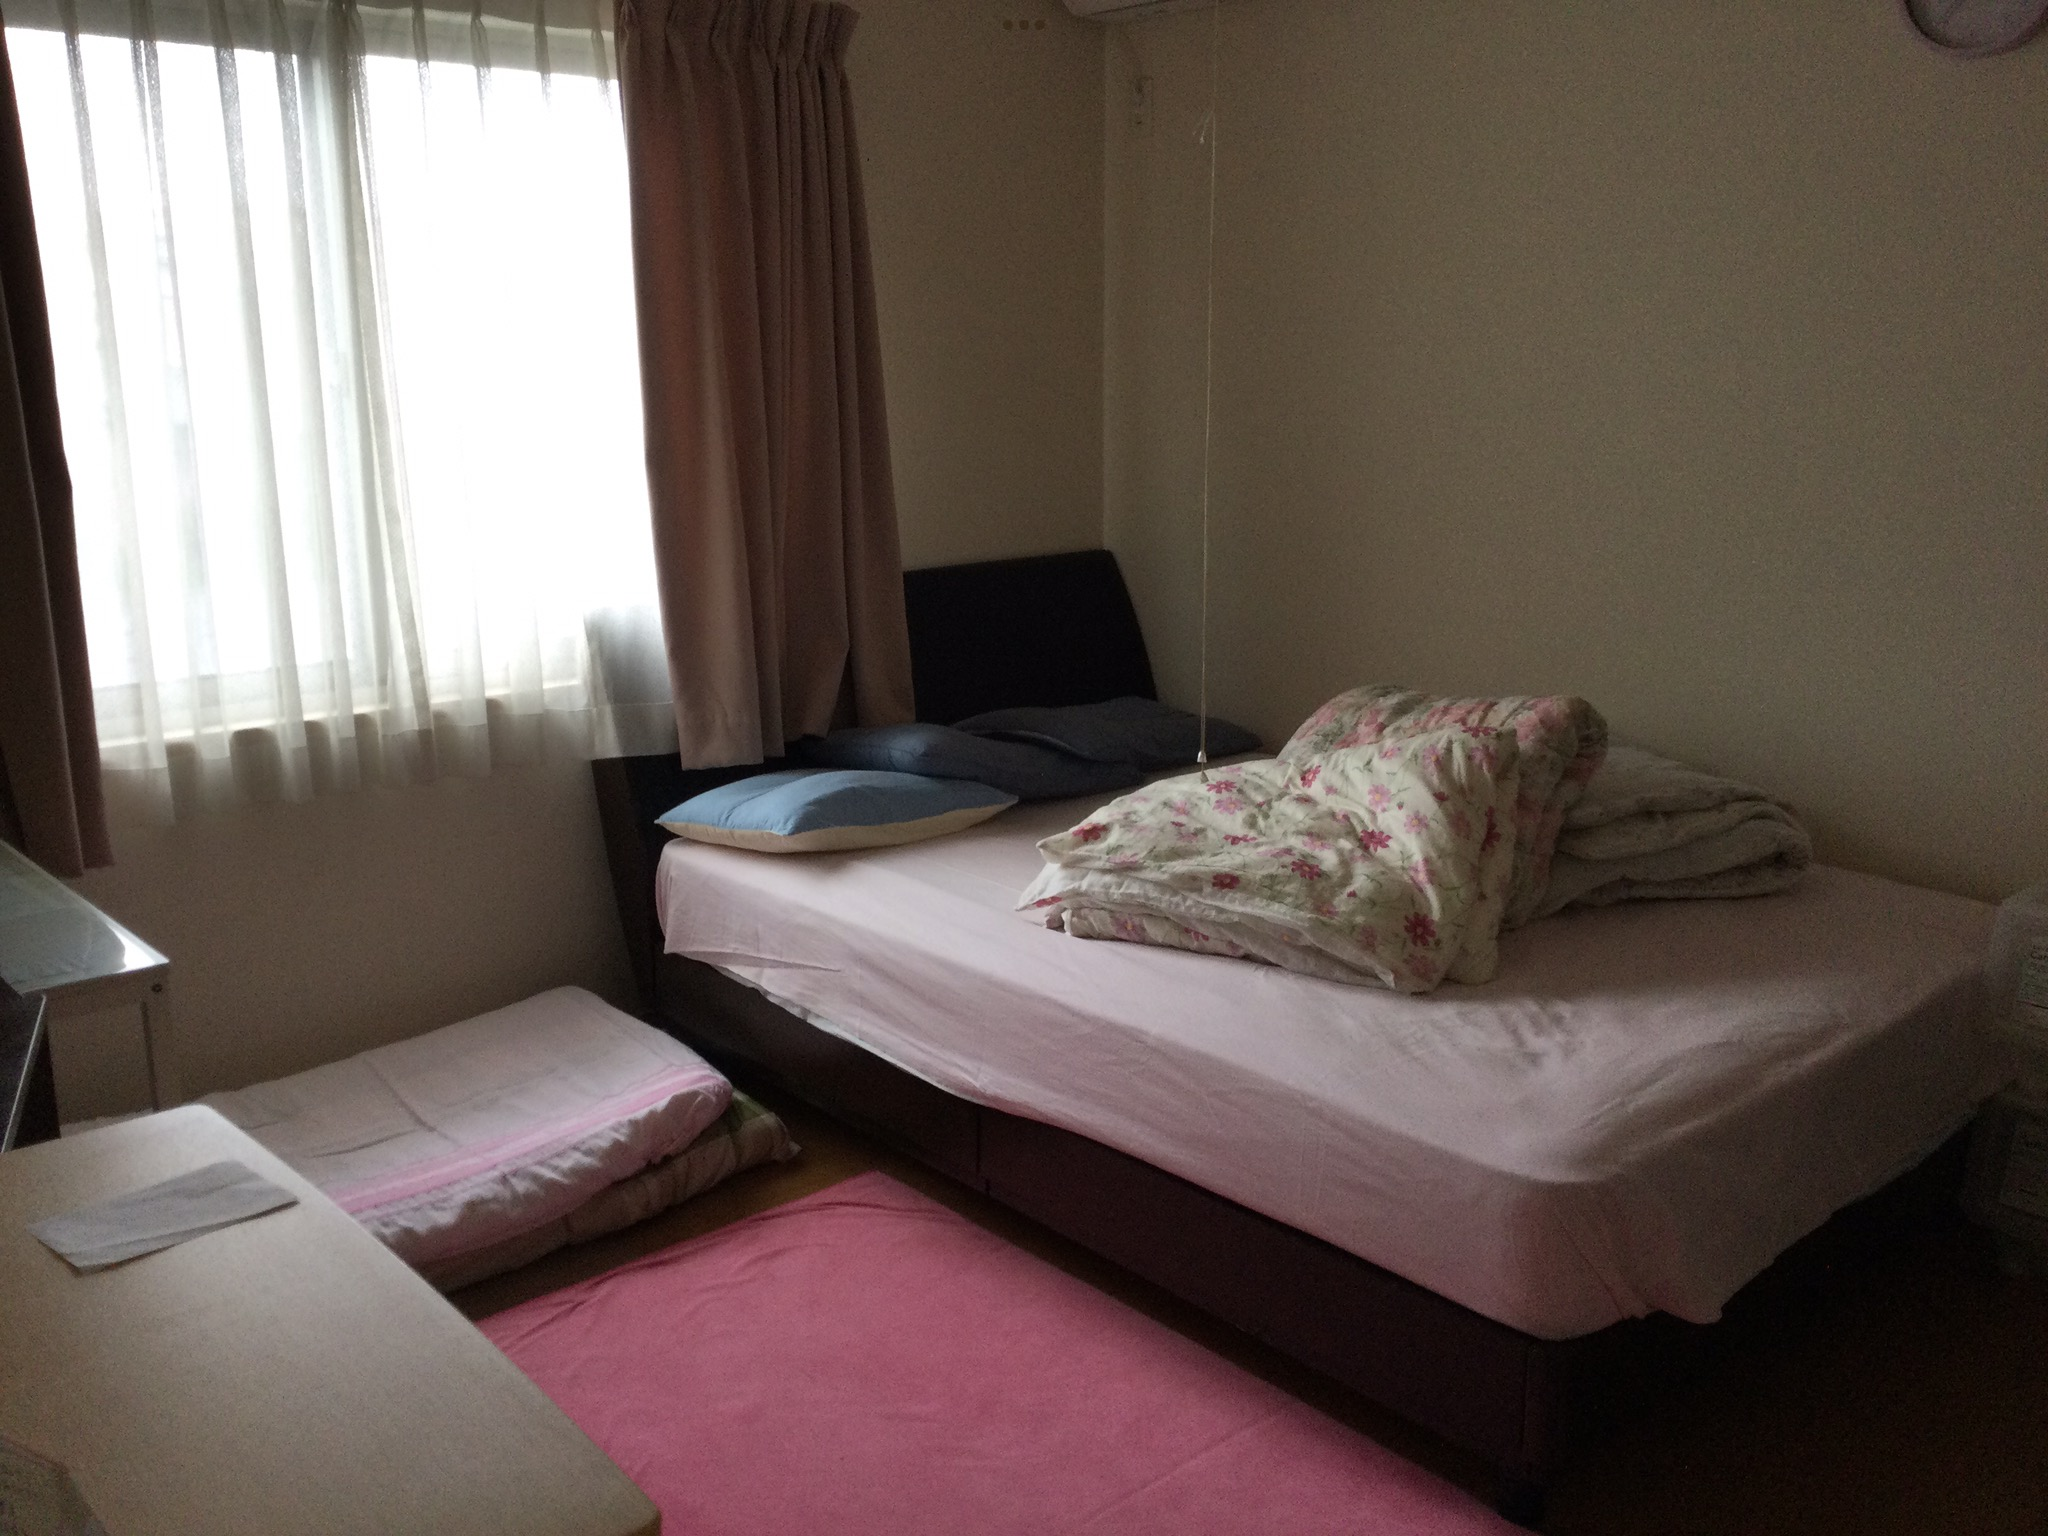 Ichihara home stay / stay with Japanese family B